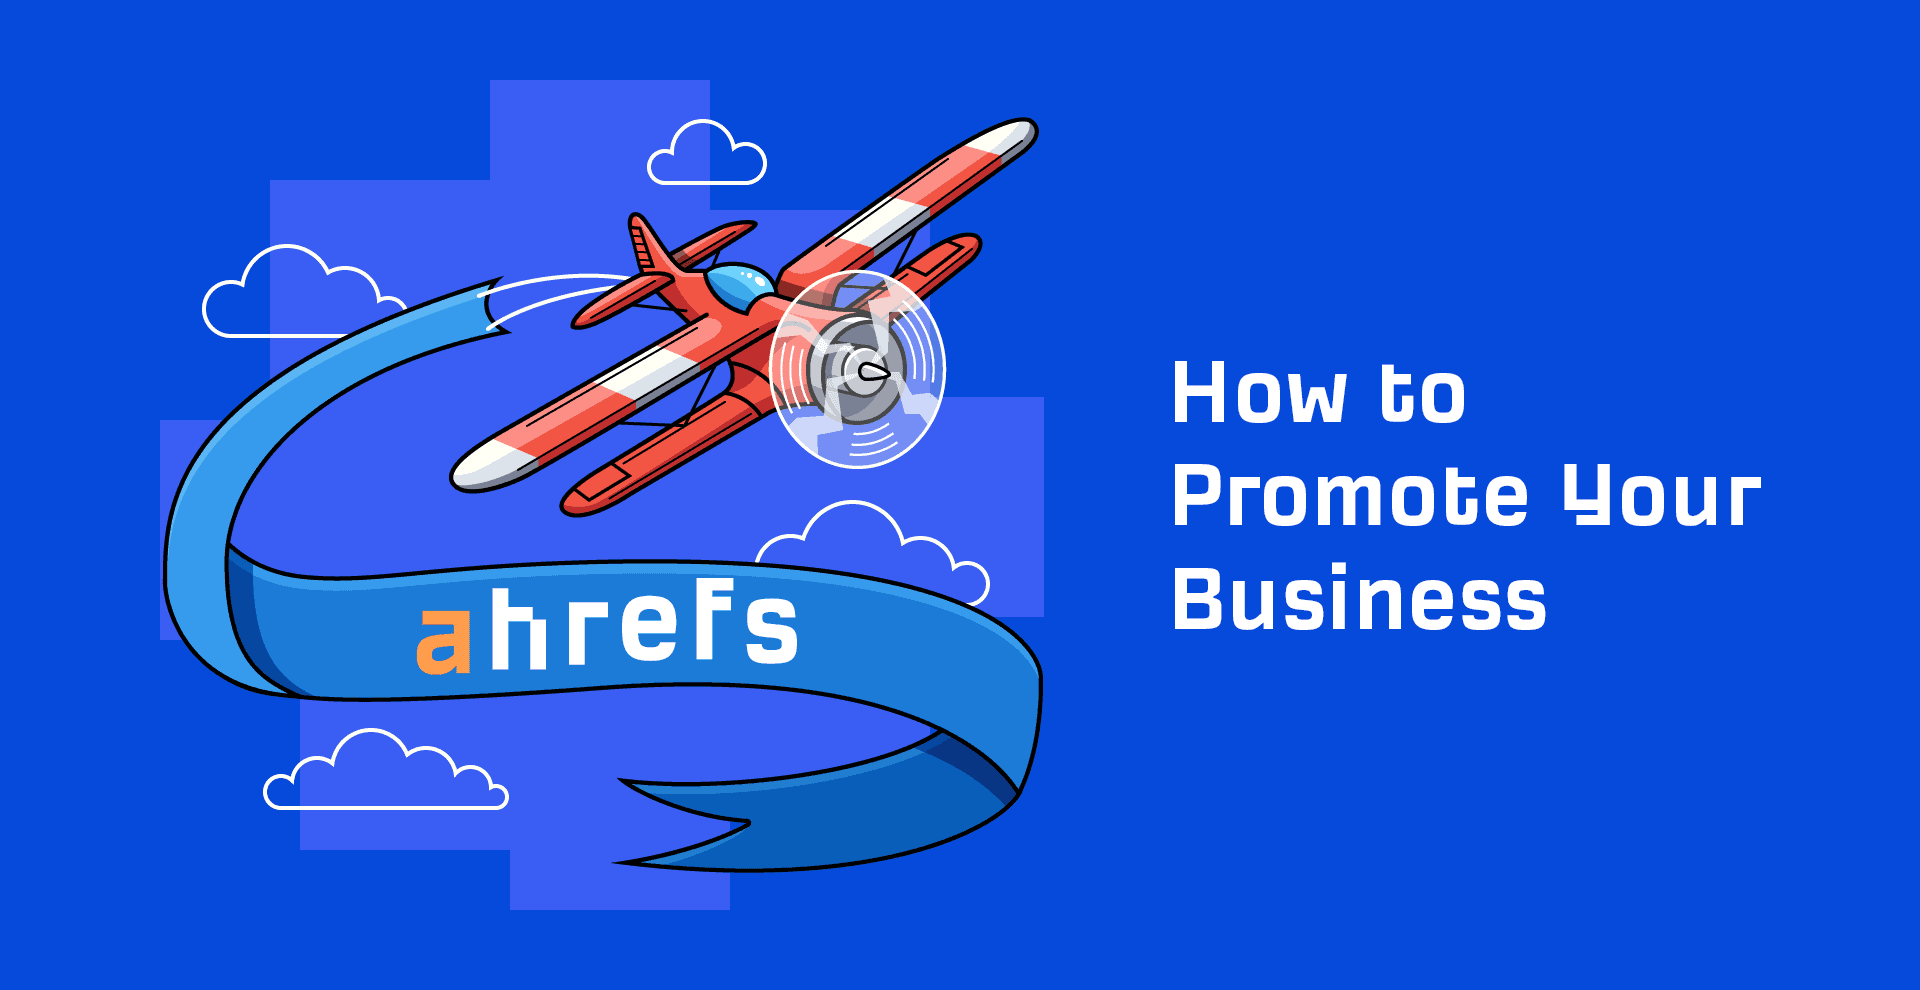 13 Free Ways to Promote Your Business